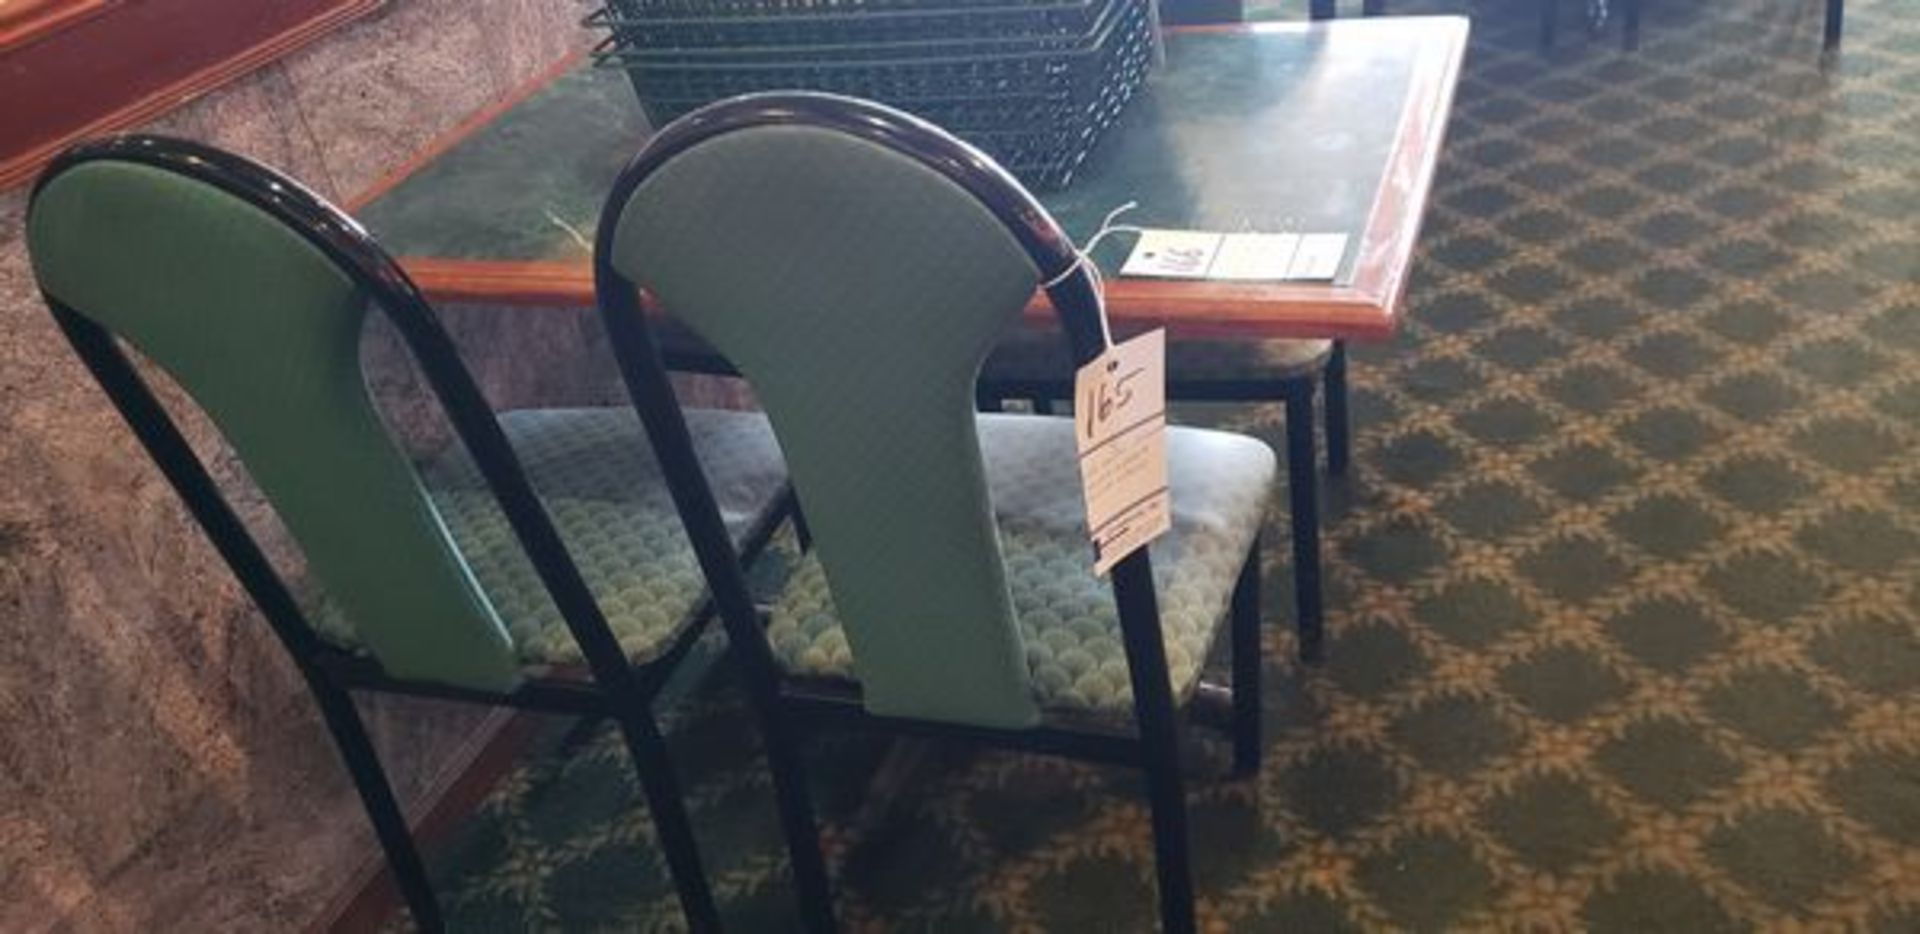 UPHOLSTERED METAL FRAME GREEN AND BLACK DINING CHAIRS - Image 5 of 6